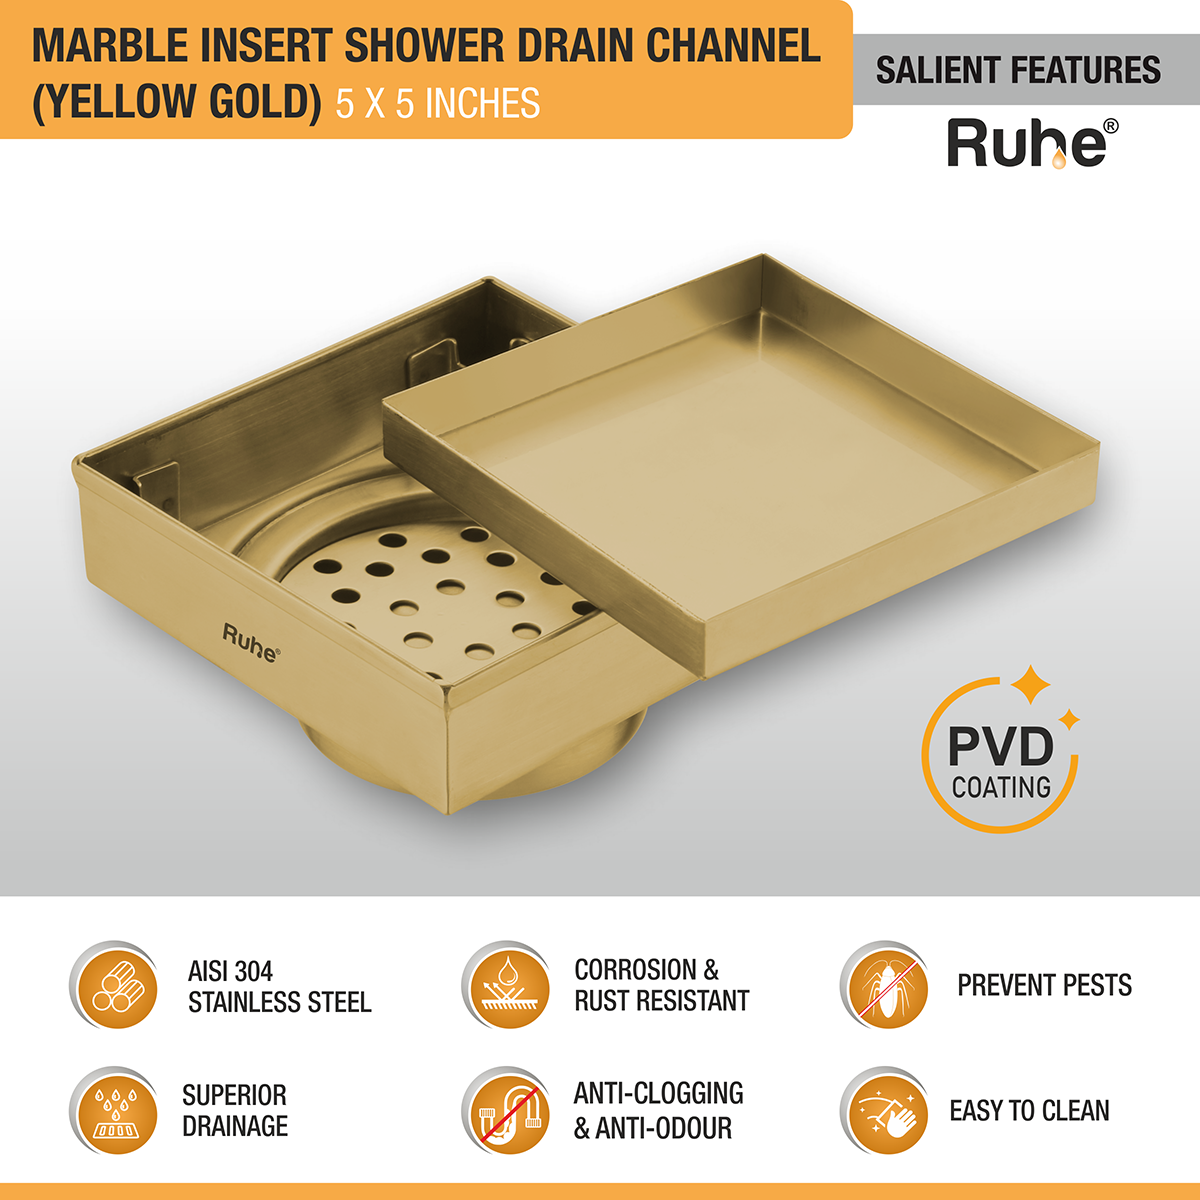 Marble Insert Shower Drain Channel (5 x 5 Inches) YELLOW GOLD PVD Coated features and benefits